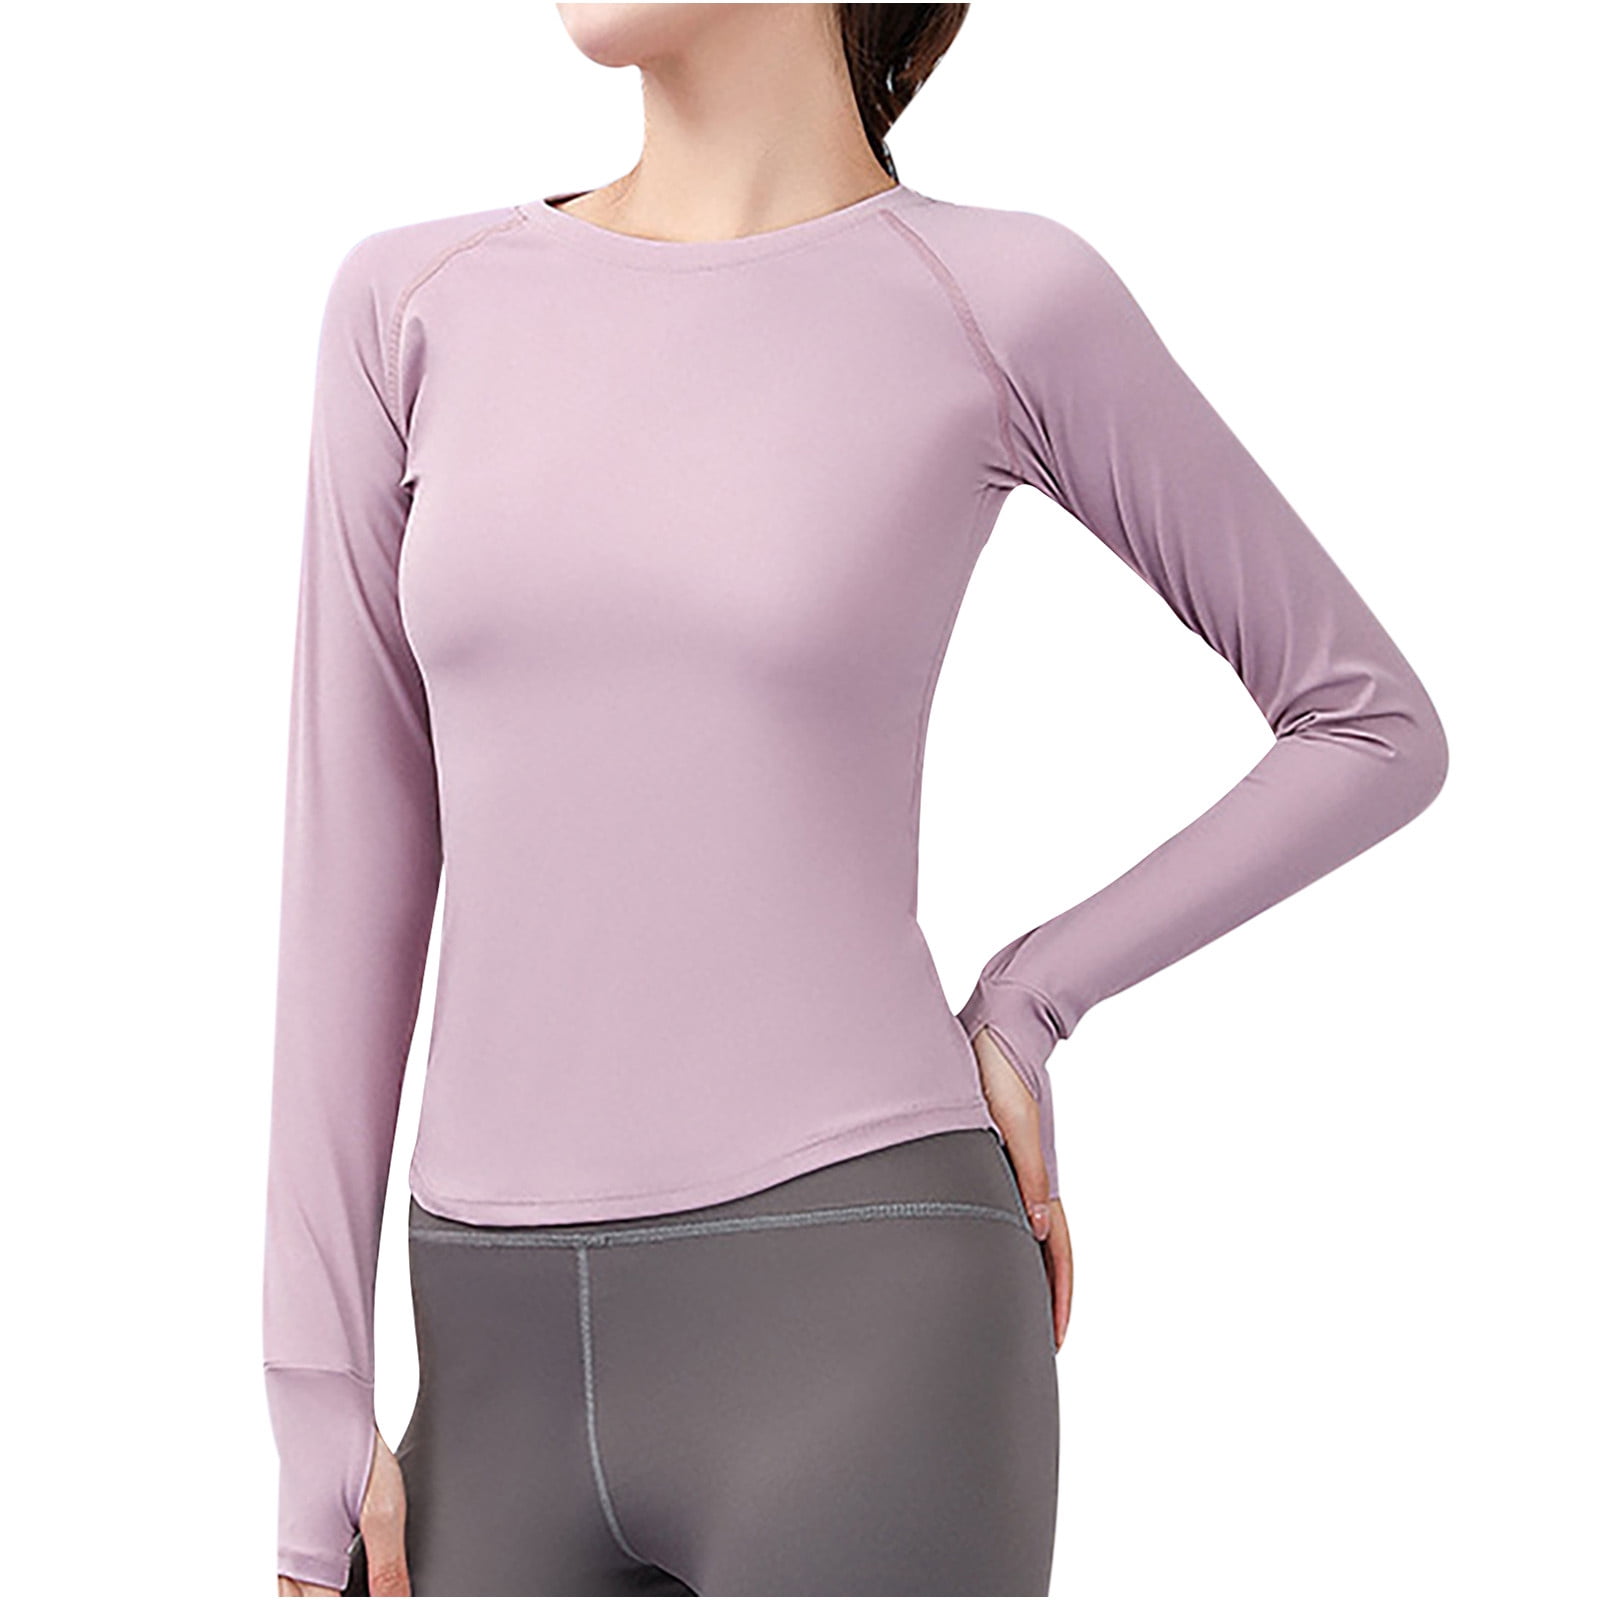  Refoiner Inner Paded Yoga Shirt Women Long Sleeve Gym Workout  Thumb Holes Breathable Anti-Sweat Running Sports Shirt Casual (Color :  Purple, Size : M Code) (Color : Purple, Size : Small) 